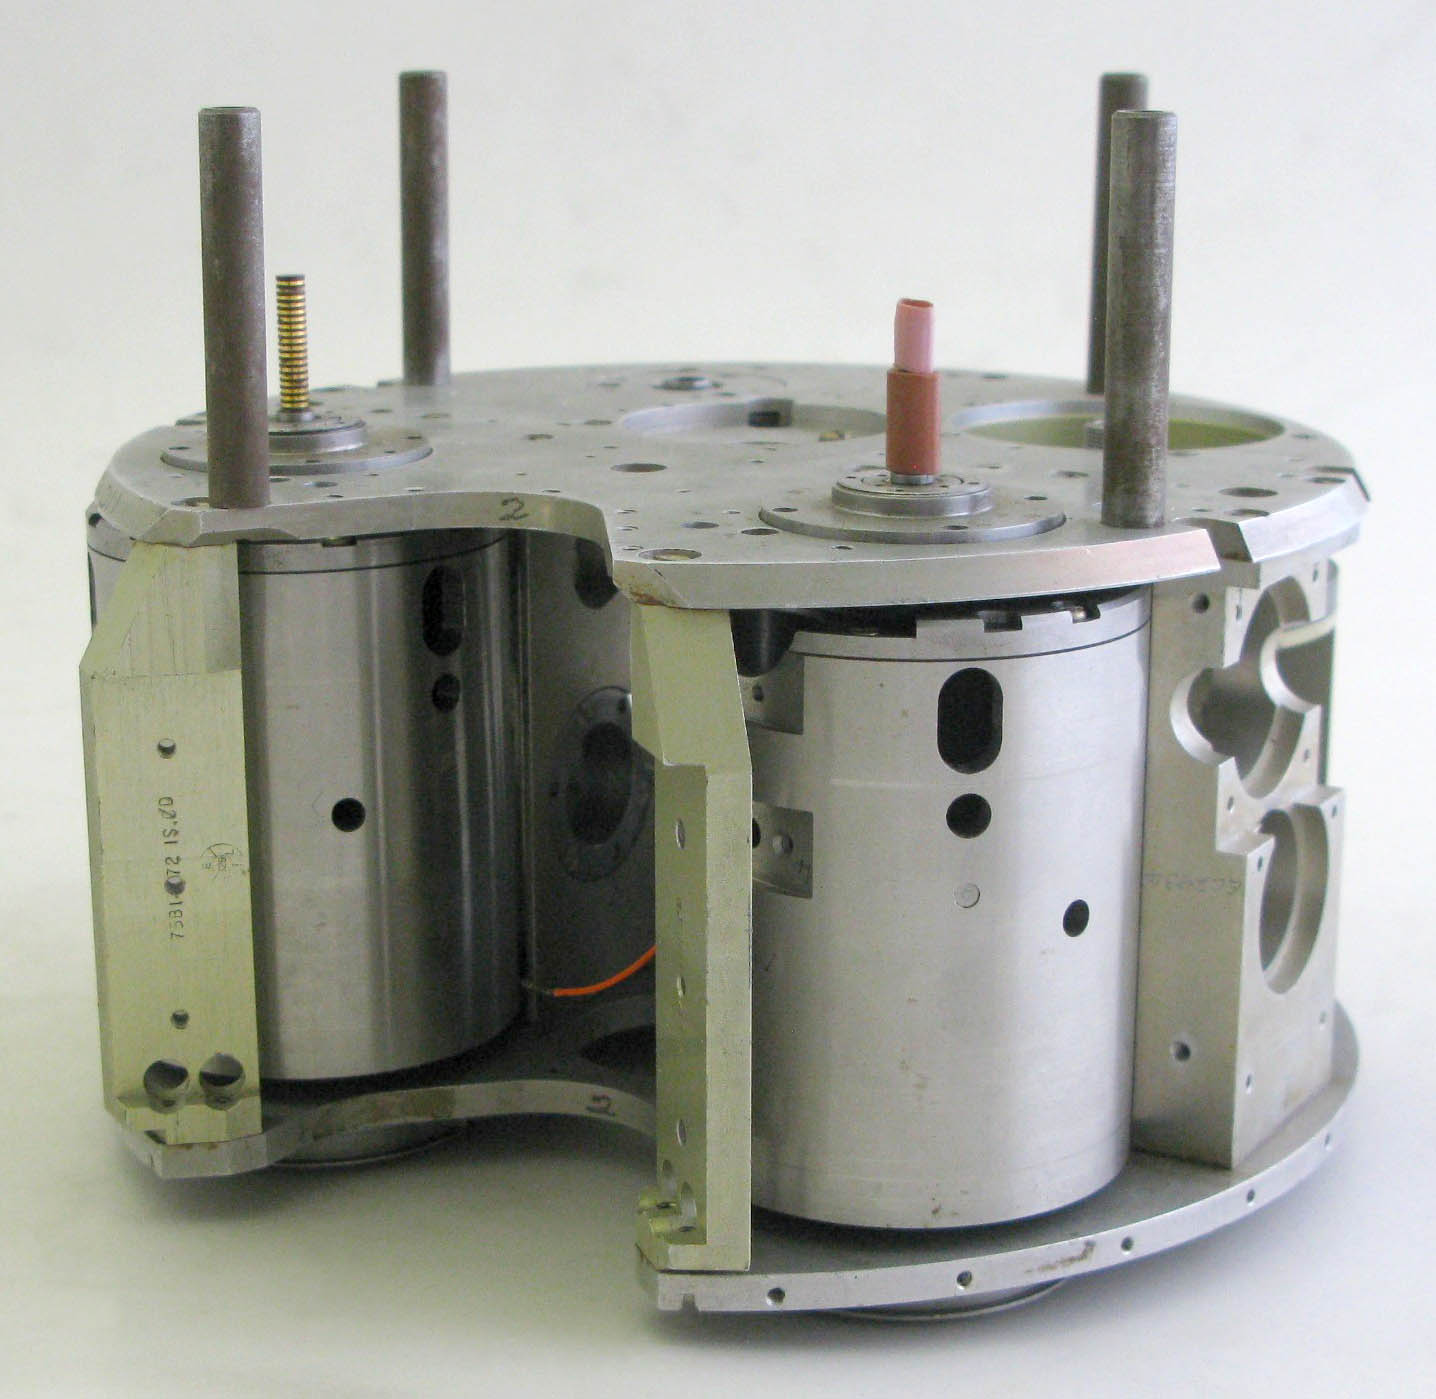 Part of early Inertial Platform